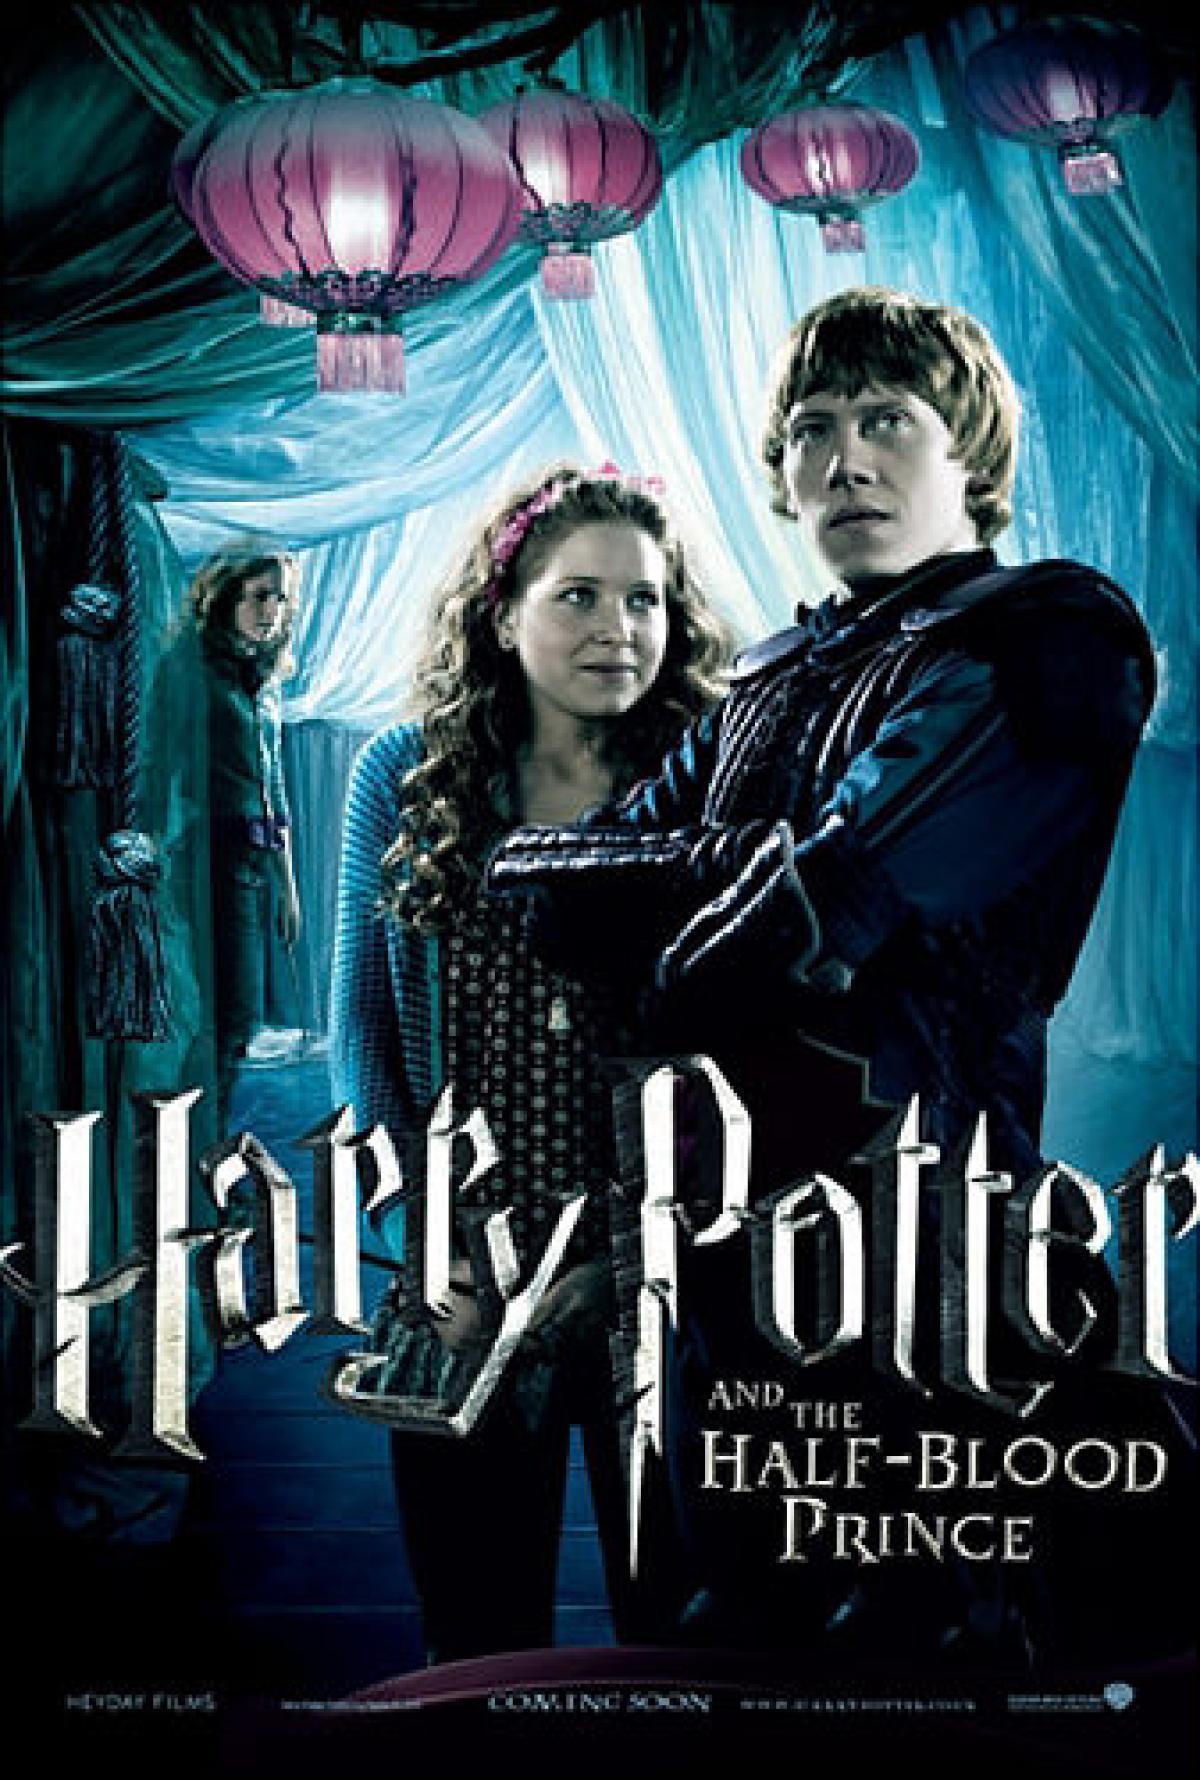 A Sneak Peek At 'Harry Potter And The Half Blood Prince'